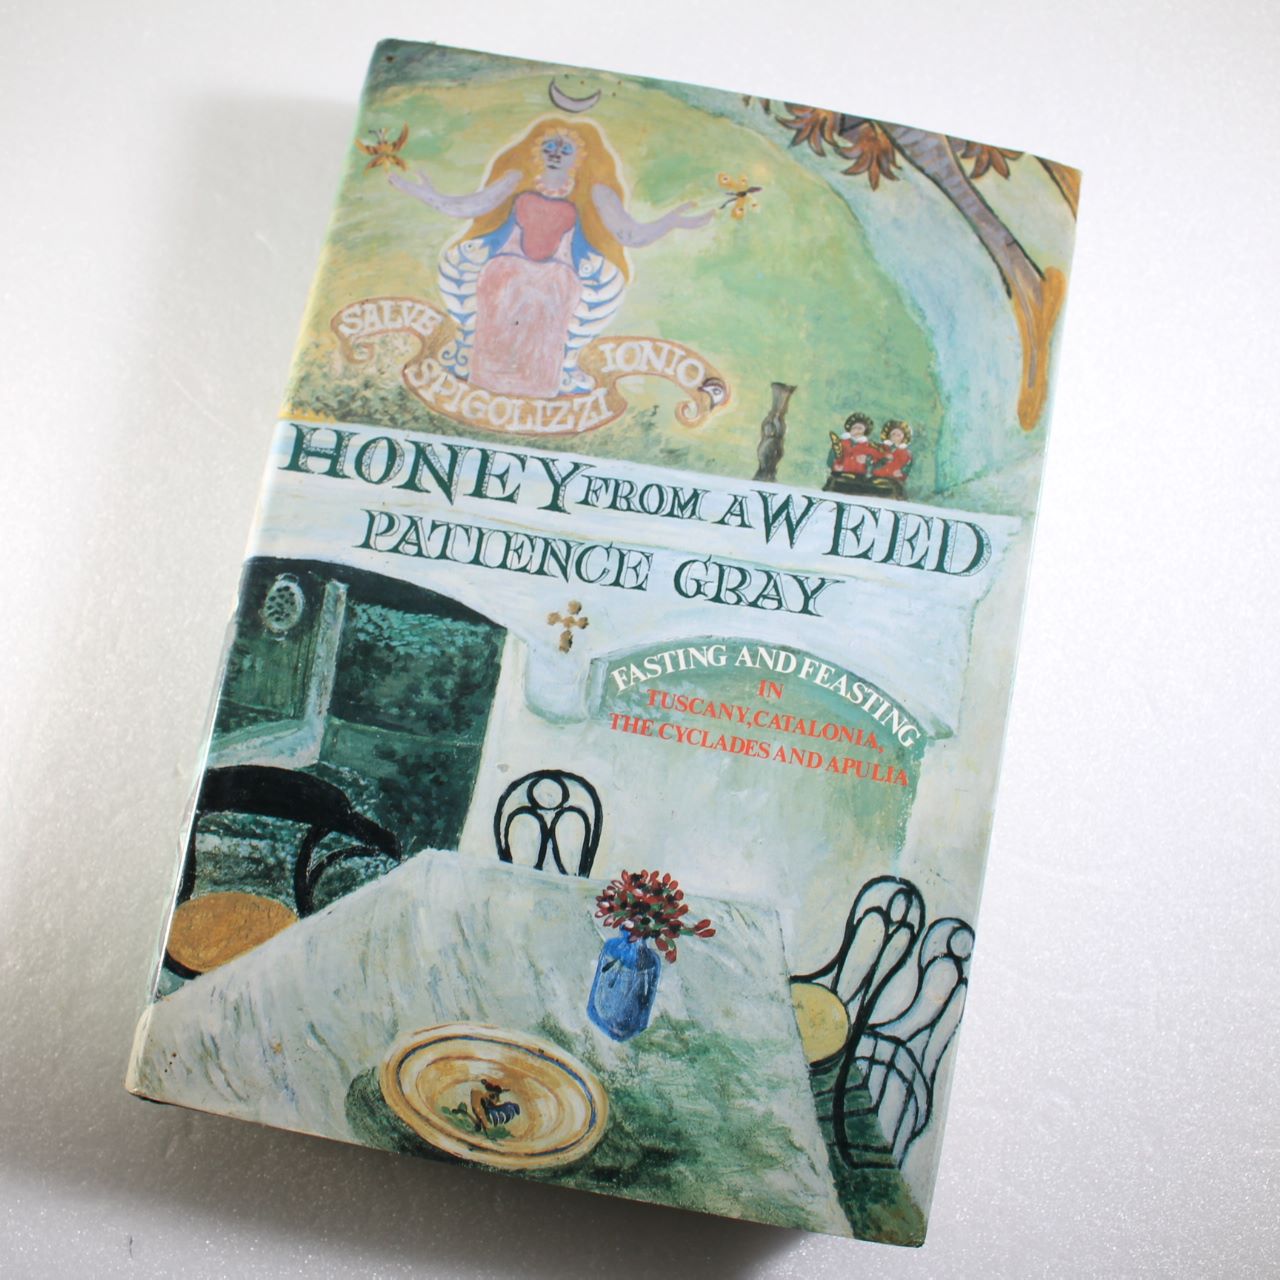 Honey From a Weed: Fasting and Feasting in Tuscany, Catalonia, the Cyclades and Apulia By Patience Gray - Patience Gray